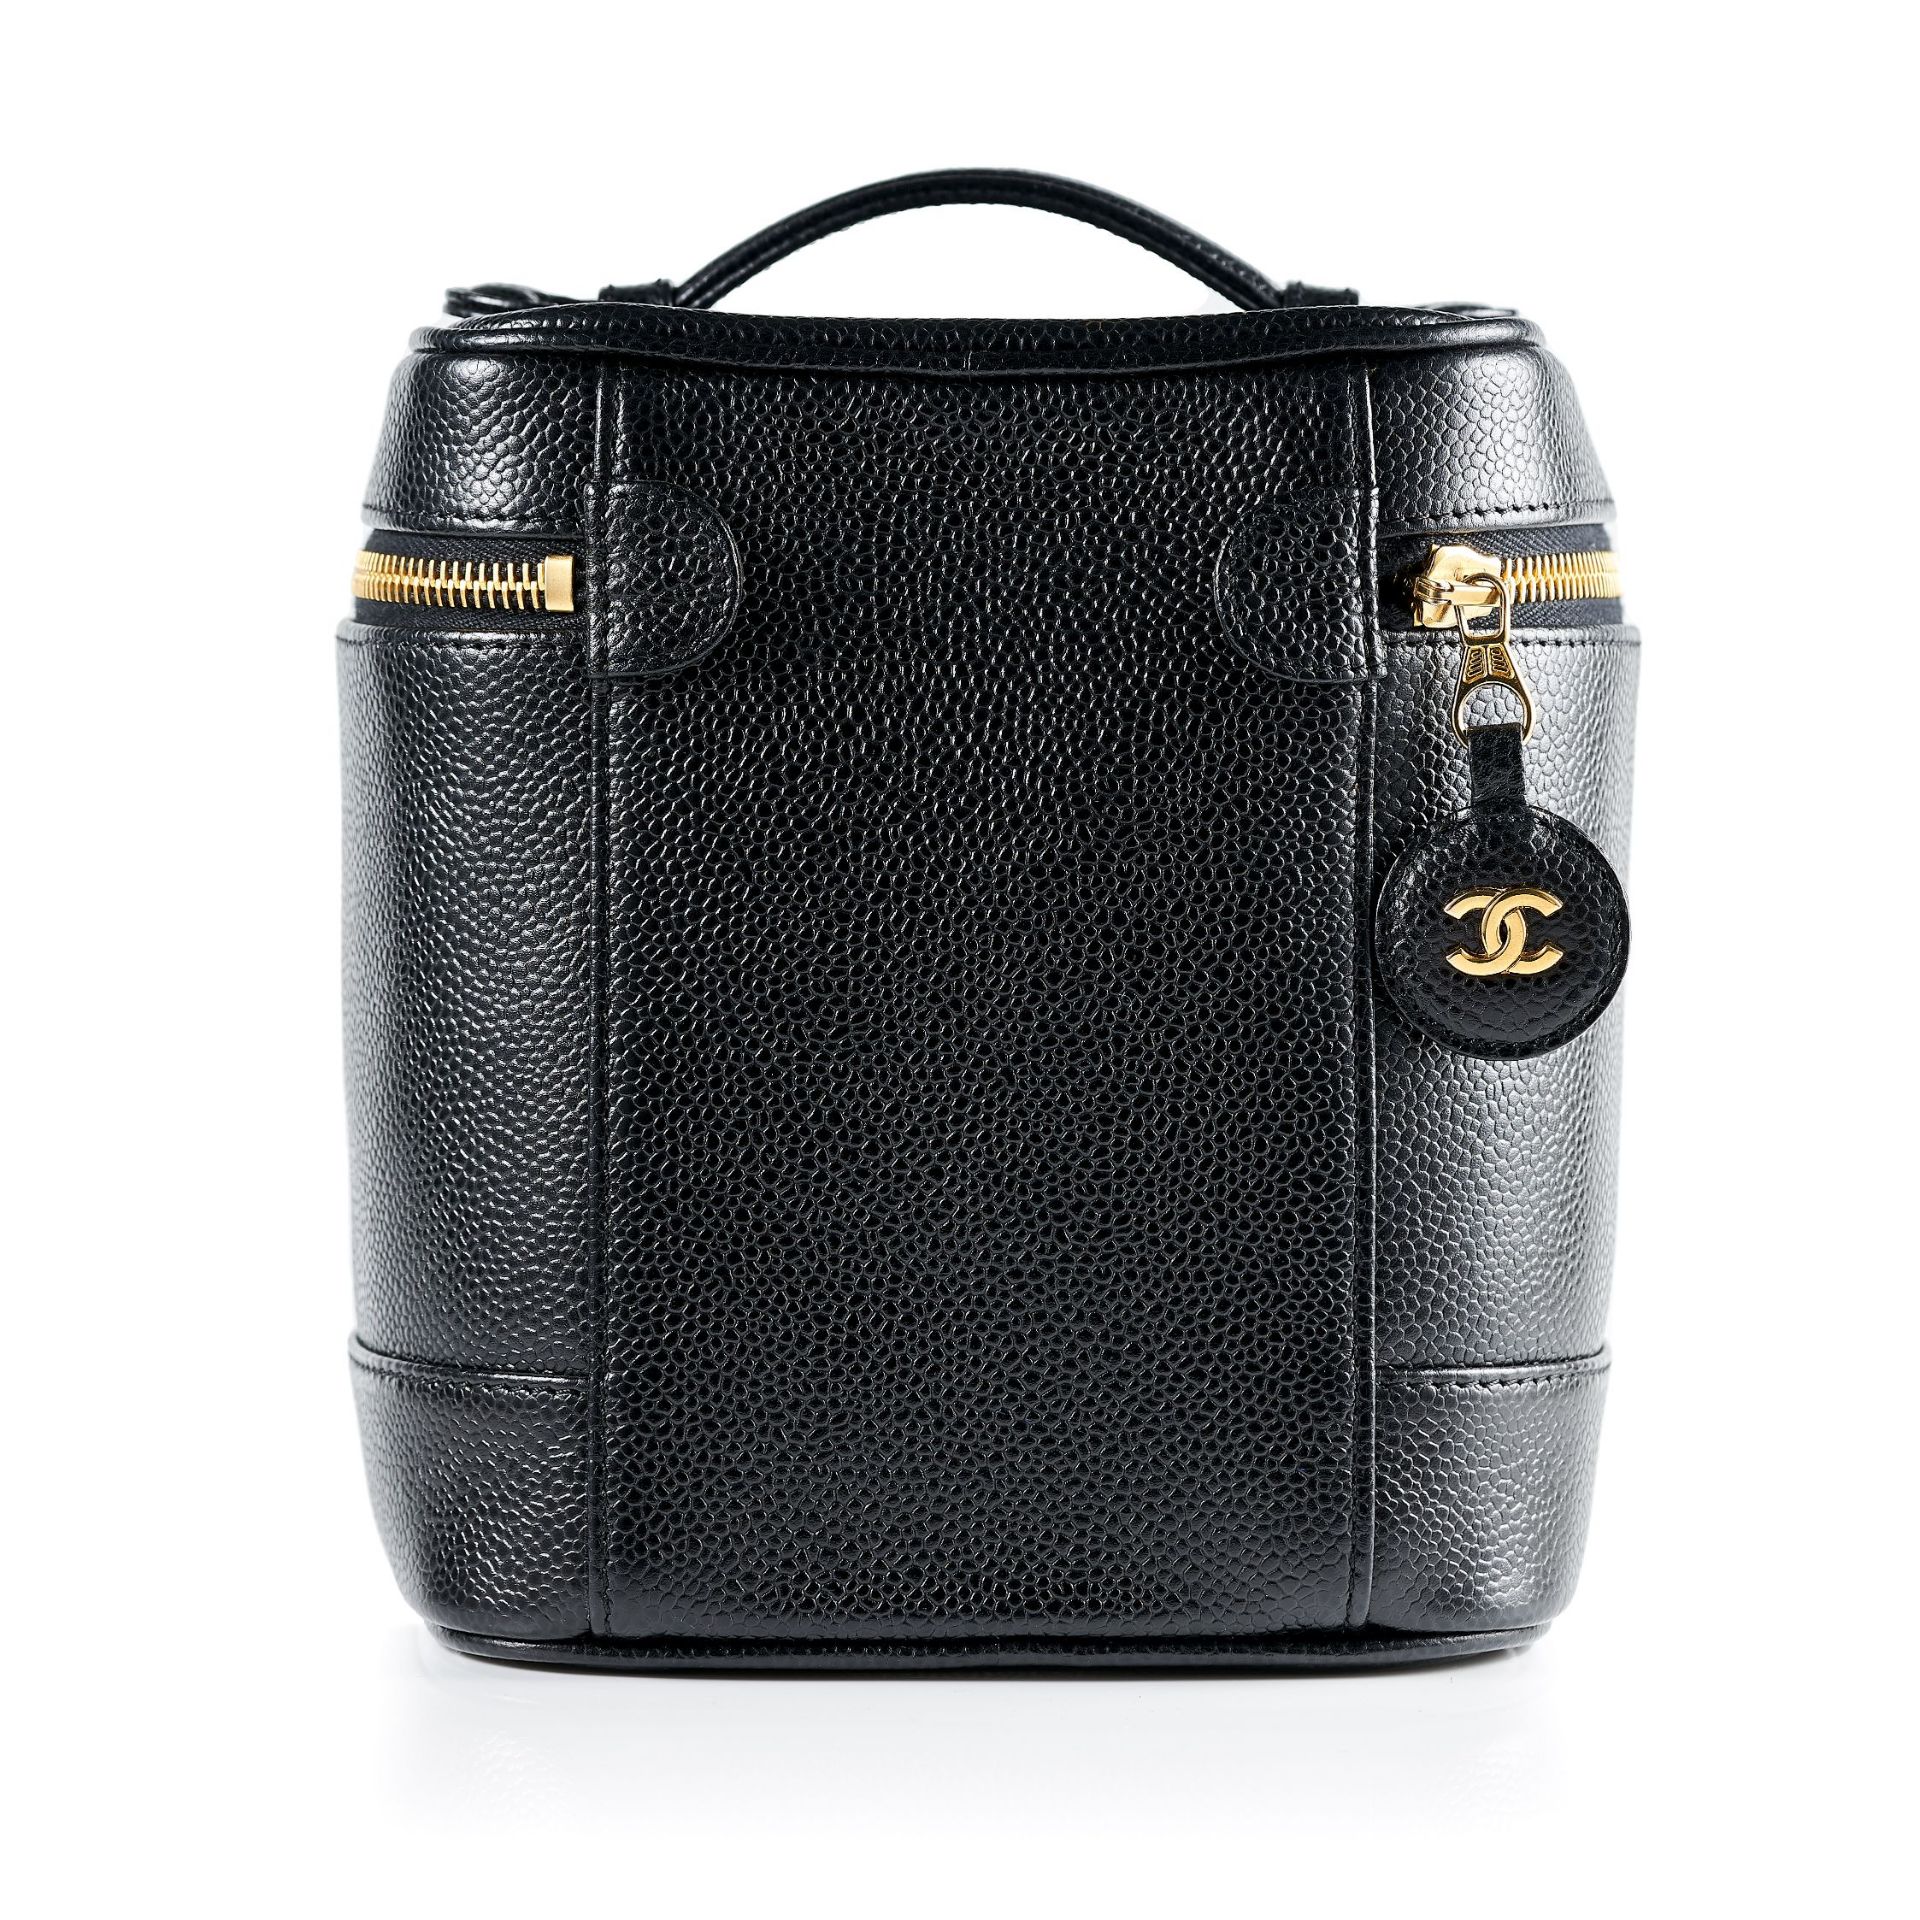 CHANEL, A LEATHER VANITY CASE calf leather, gold tone hardware, 16.0cm wide, 18.0cm high, includes - Image 2 of 3